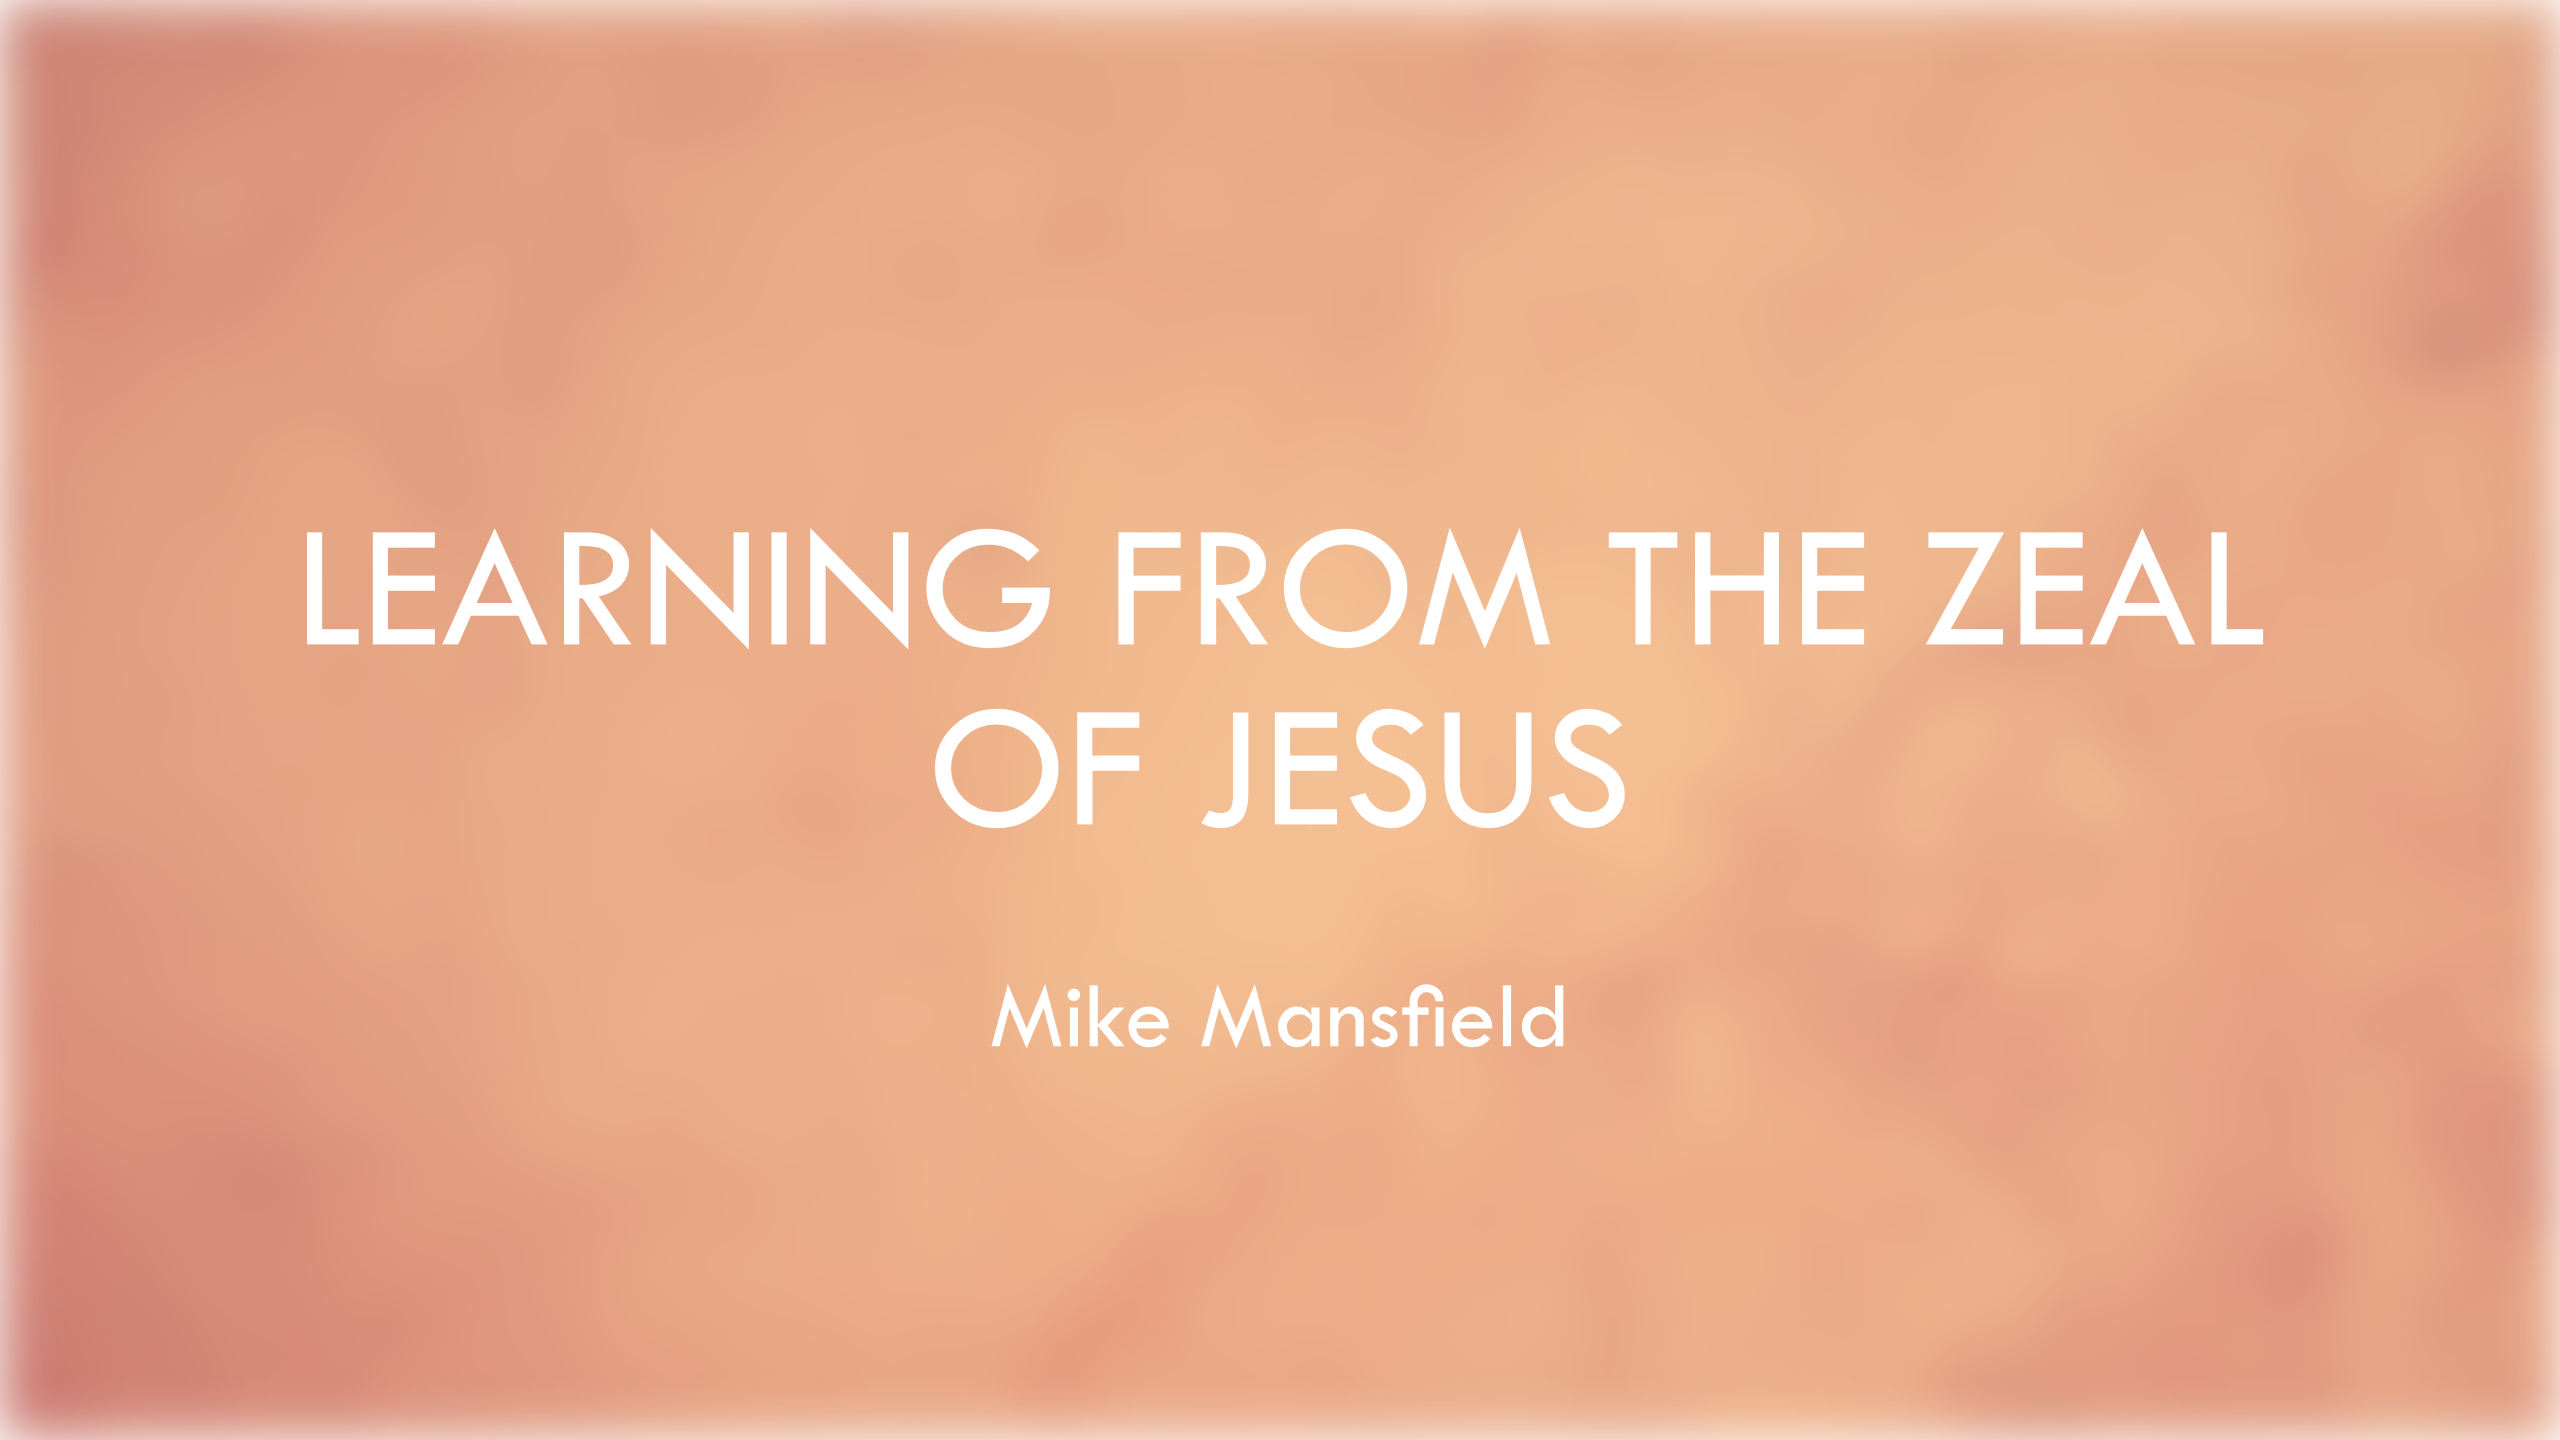 Learning from the Zeal of Jesus